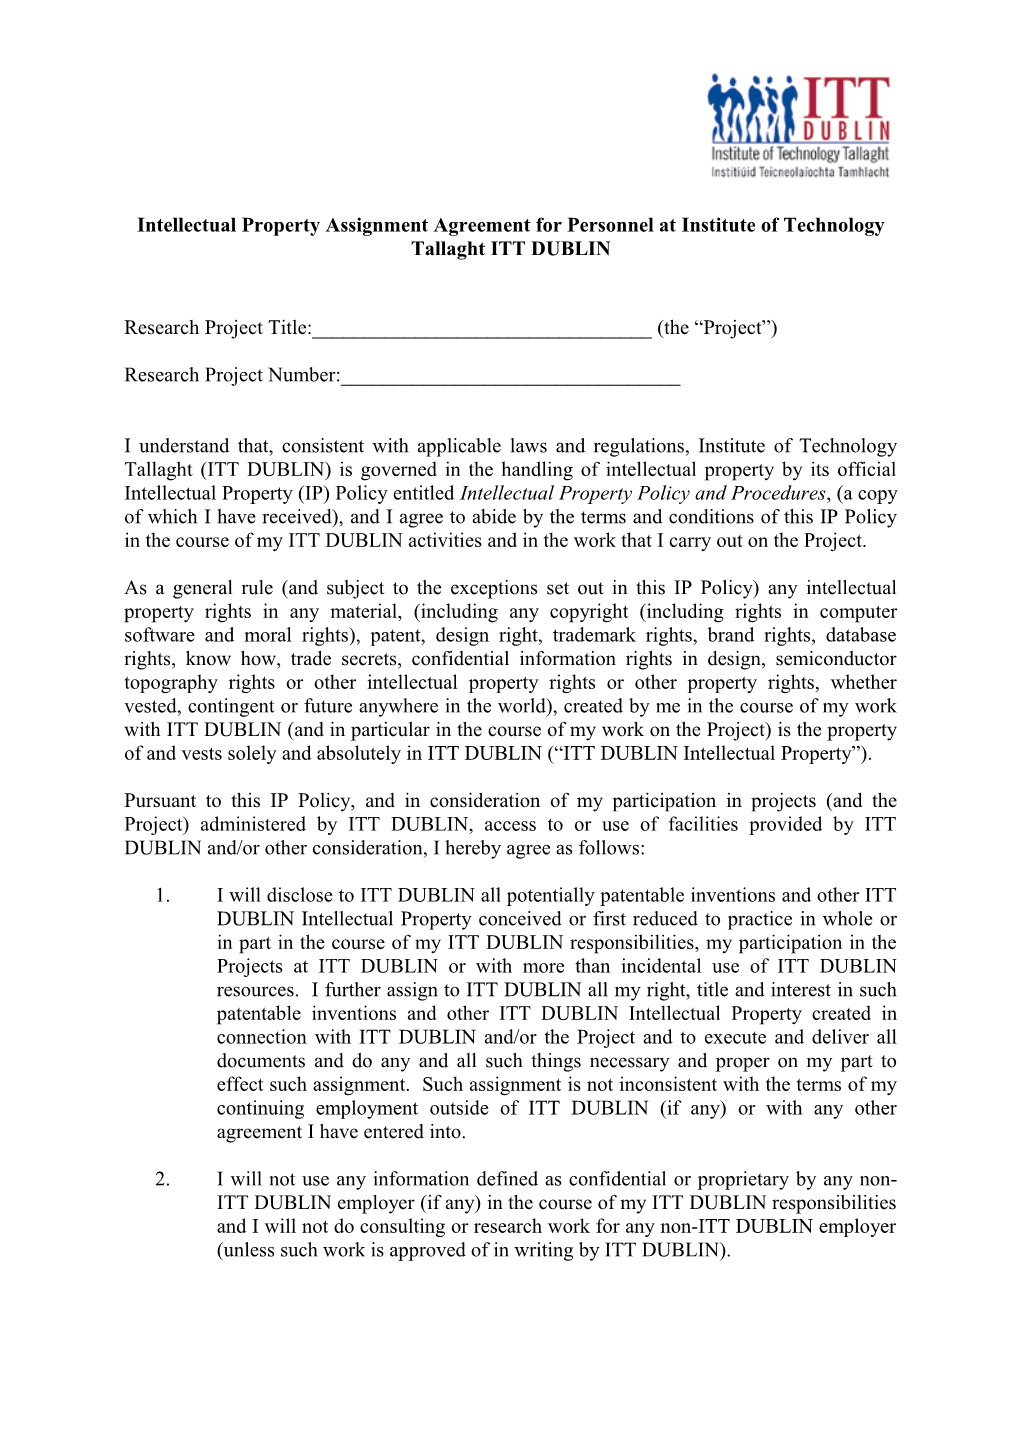 Intellectual Property Assignment Agreement for Personnel at Institute of Technology Tallaghtitt